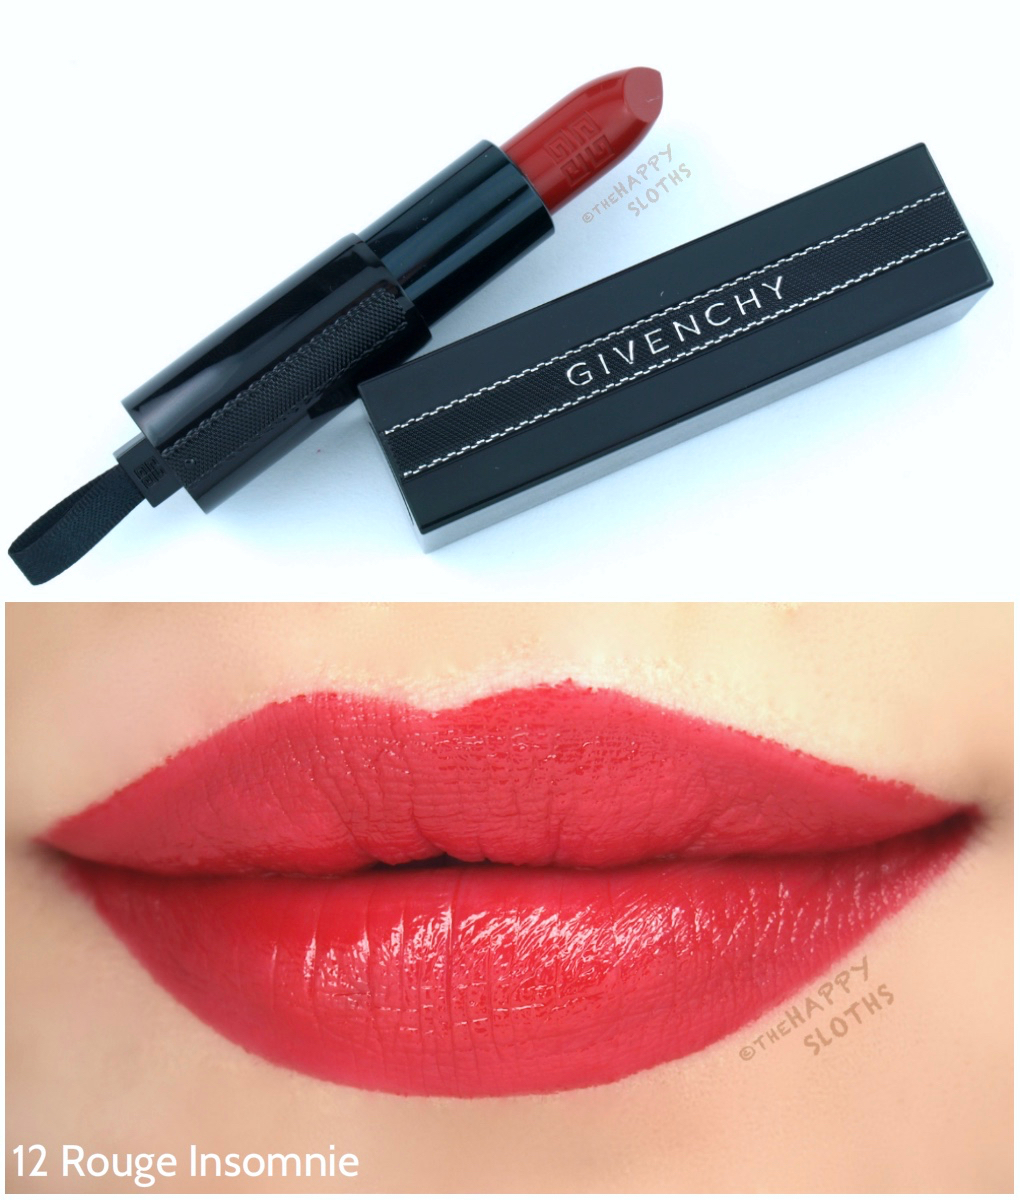 Givenchy Rouge Interdit Satin Lipsticks 12 Rouge Insomnie Review and Swatches